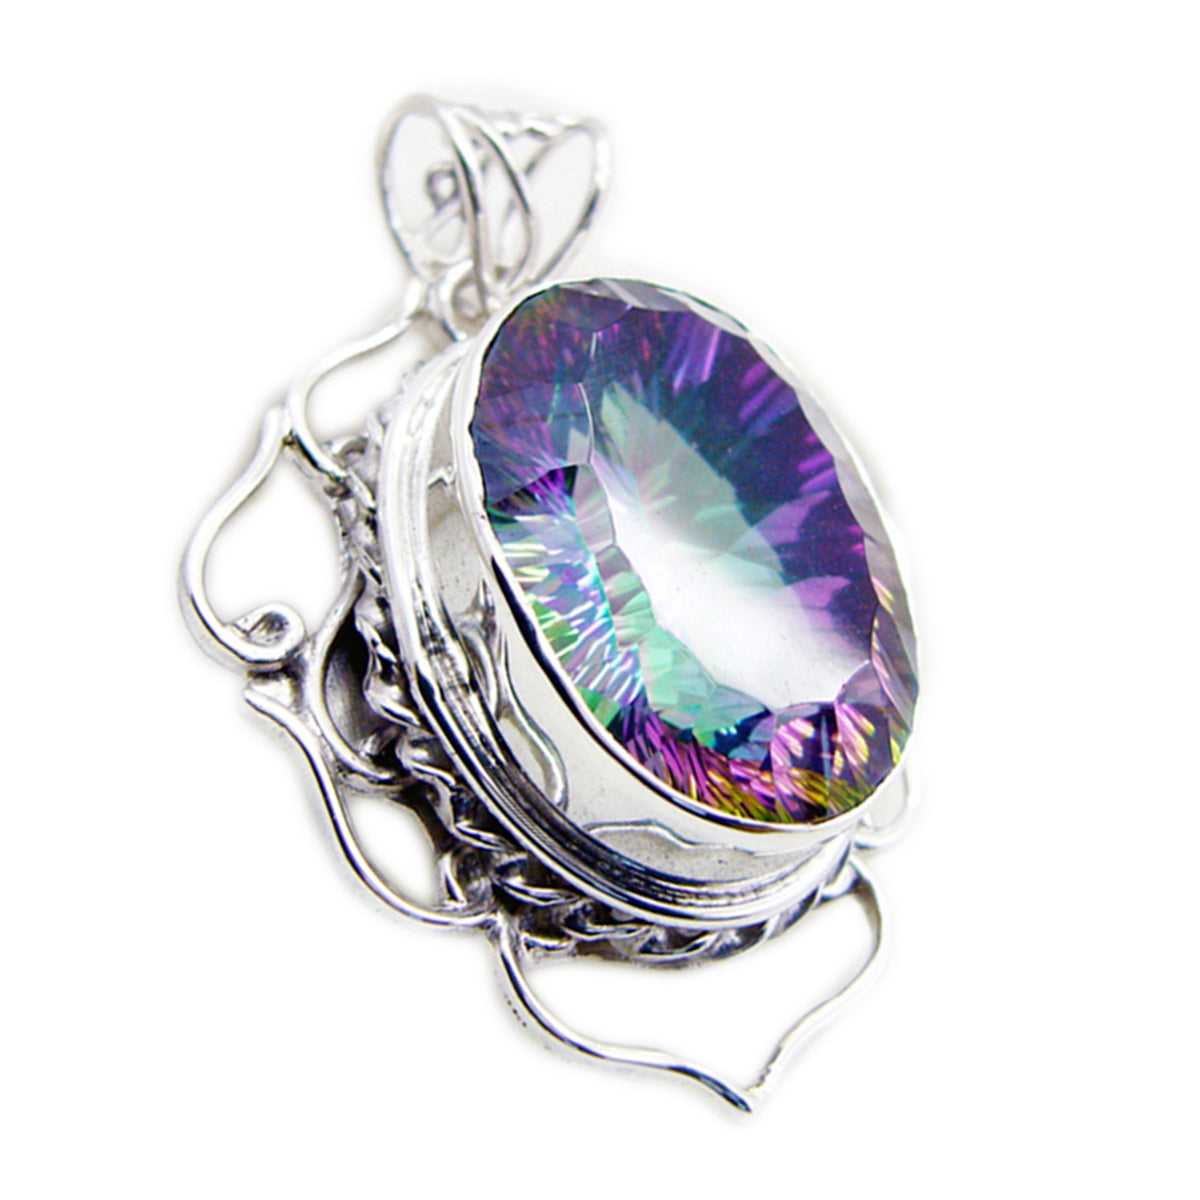 Riyo Bewitching Gems Oval Faceted Multi Color Mystic Quartz Silver Pendant Gift For Boxing Day